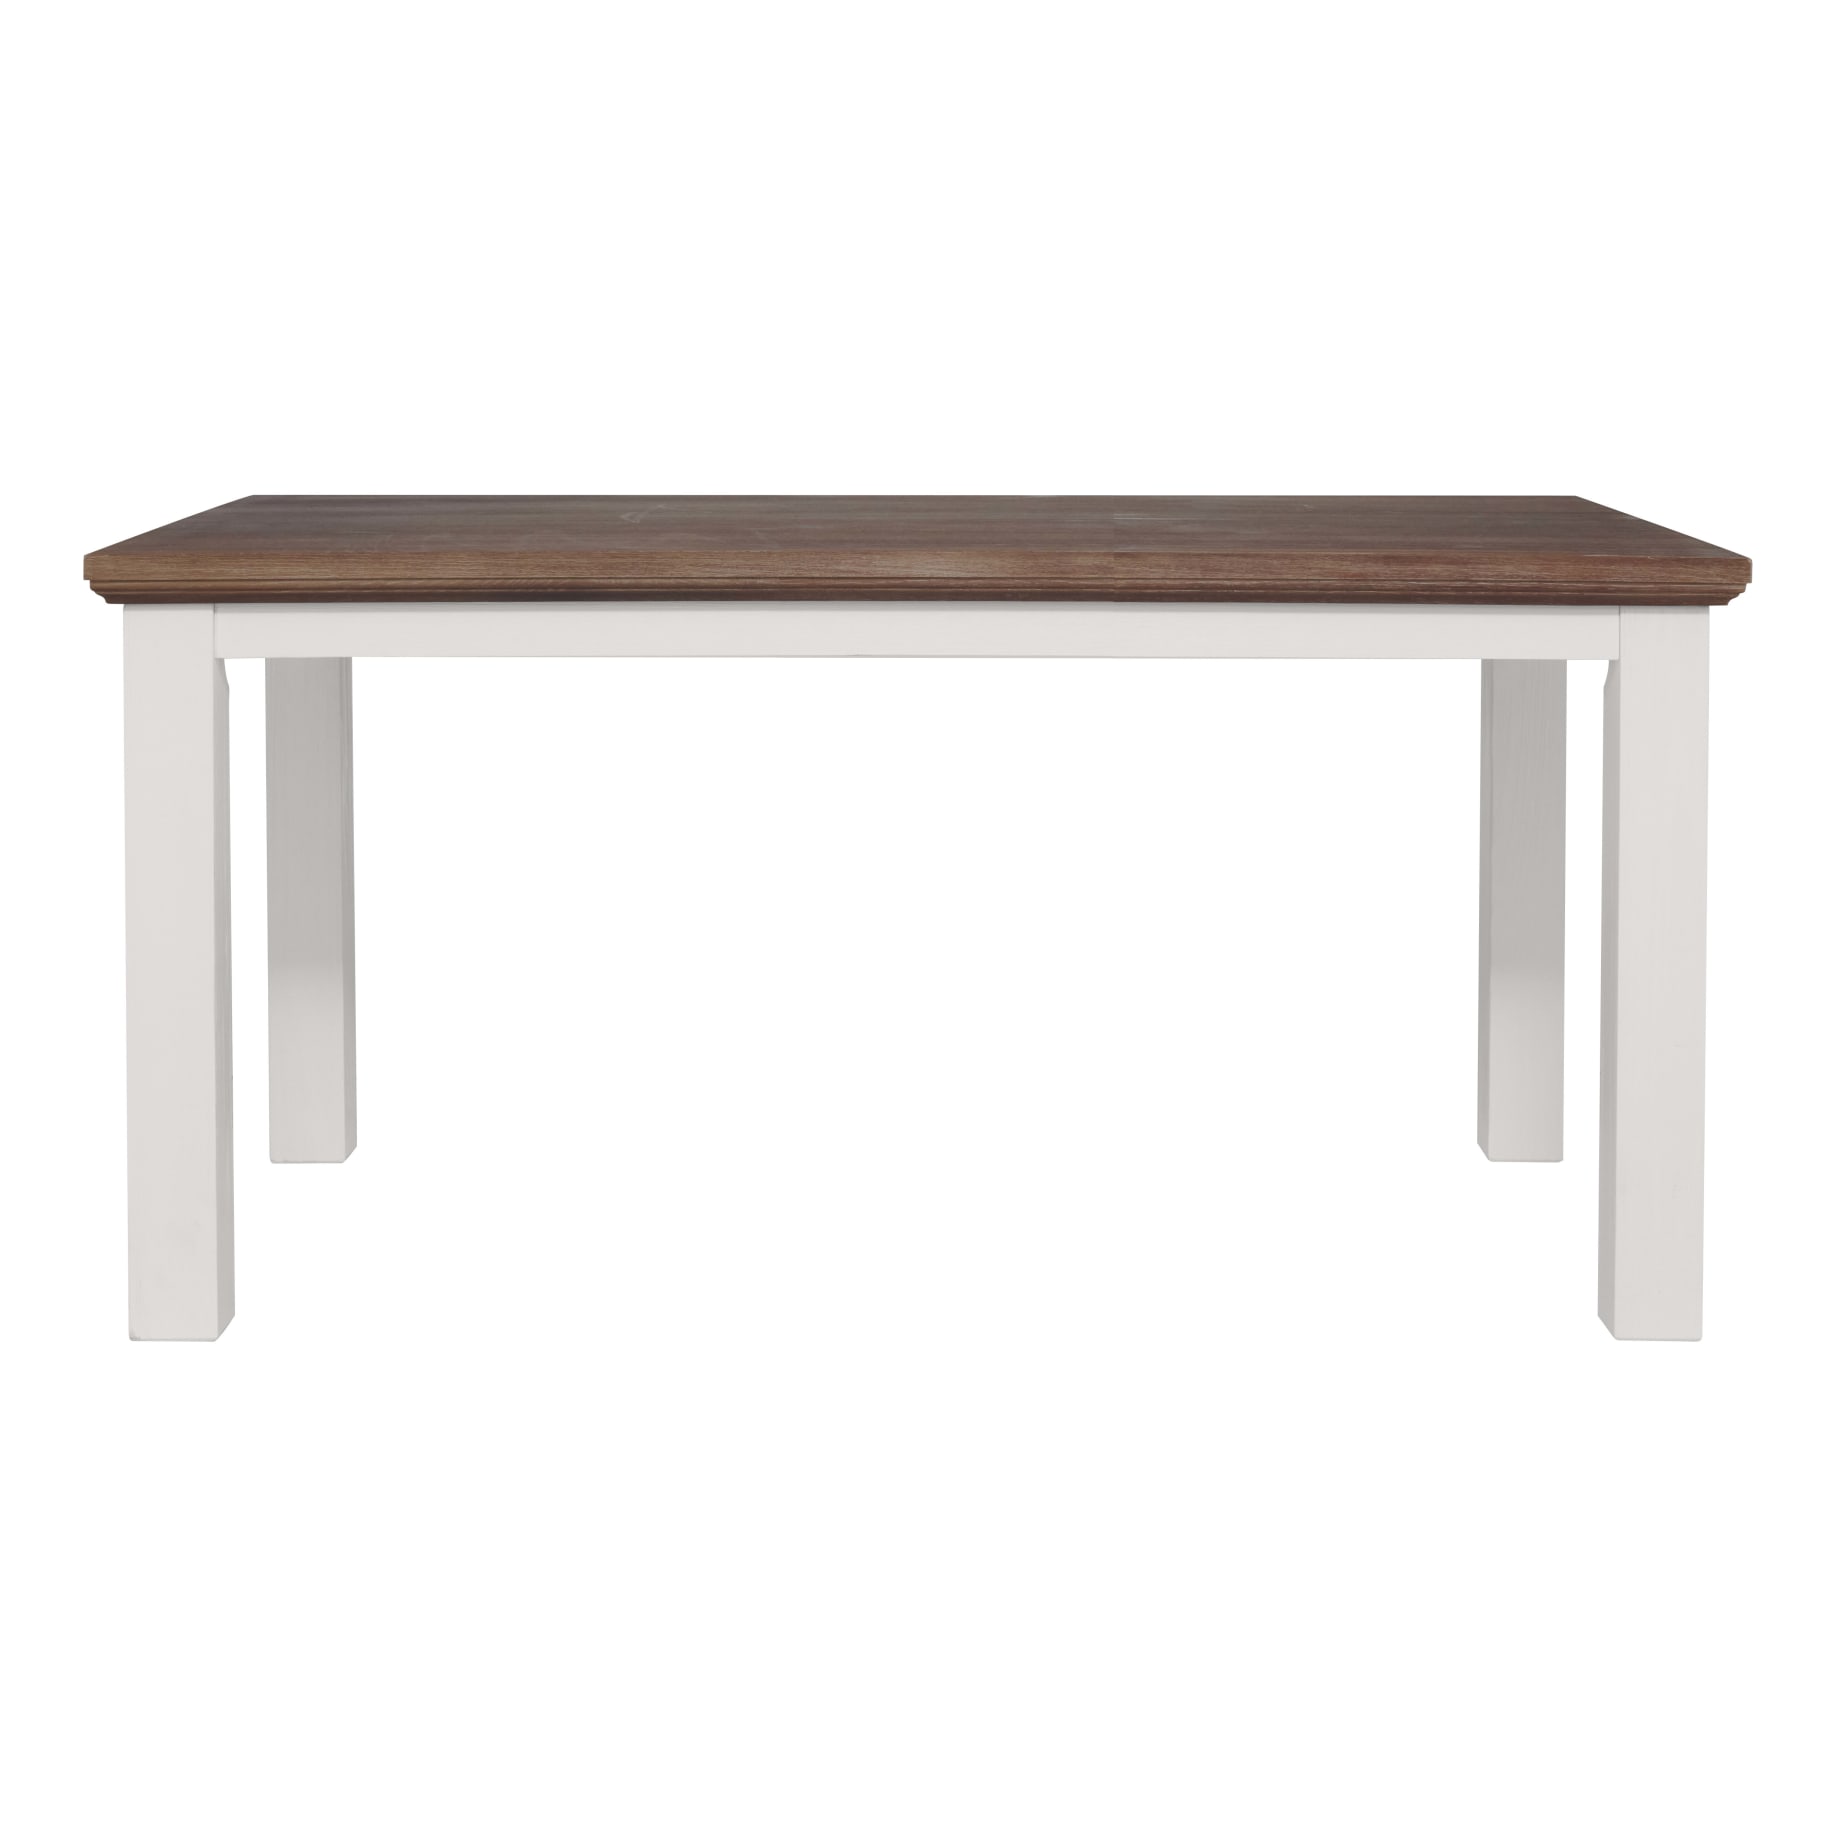 Hamptons Dining Table 160cm in Two Tone